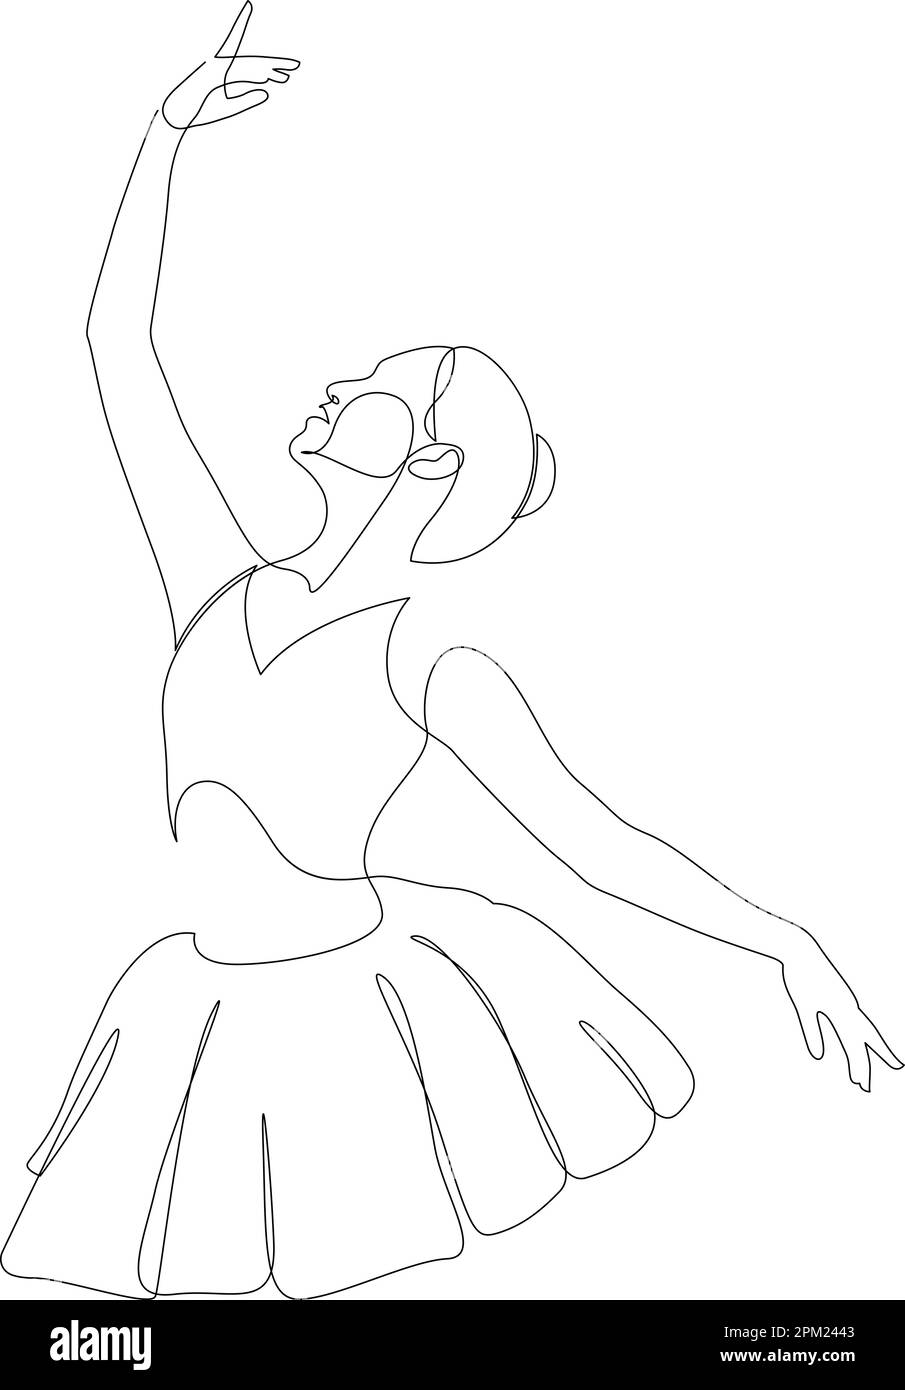 Continuous Line Drawing Of Ballerina In Motion Ballet Dancer Black Line Sketch On White 